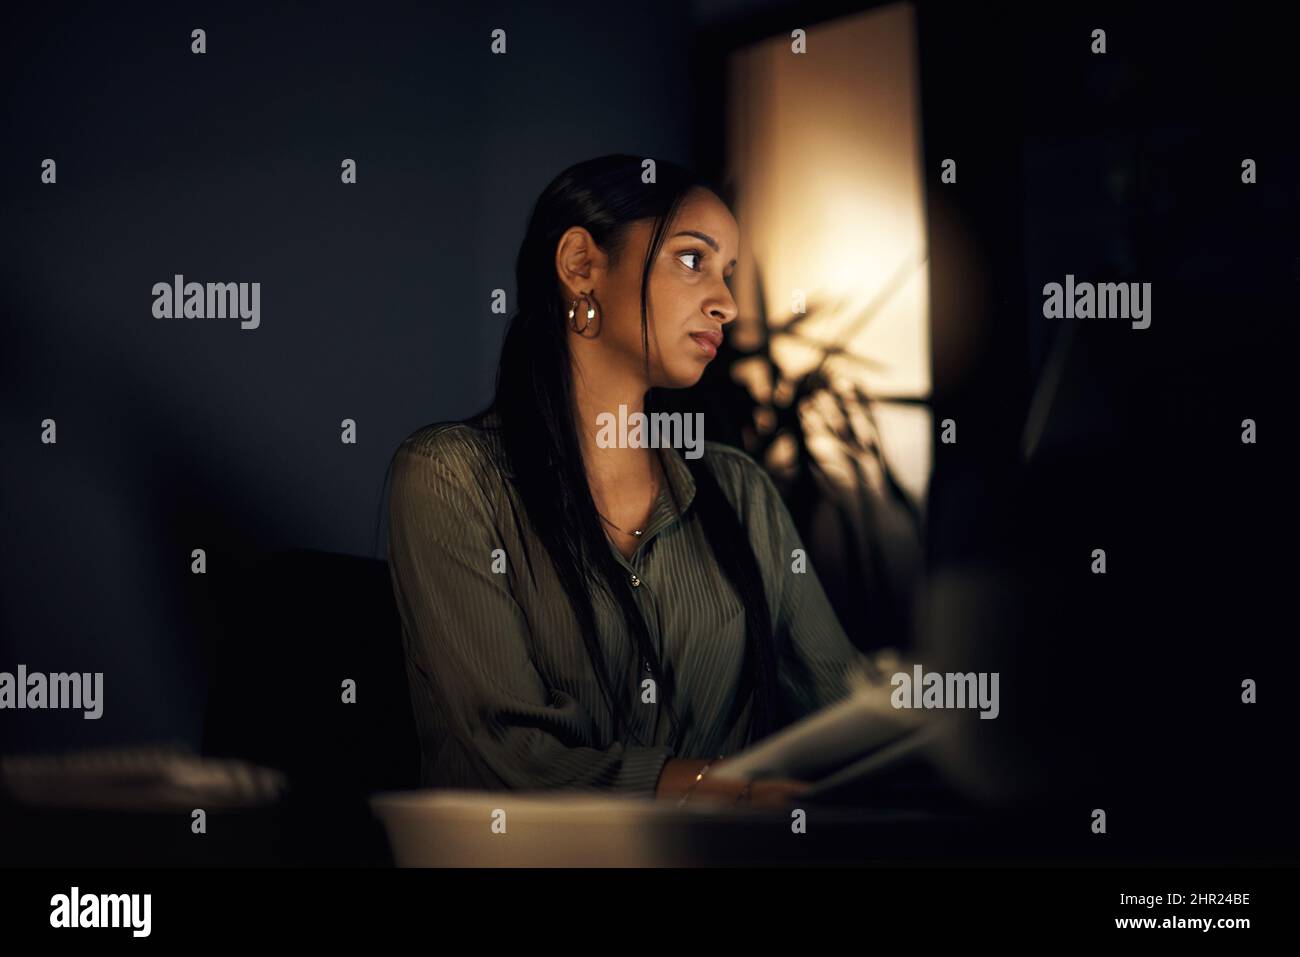 Focused on seeing it through to the end of the deadline. Shot of a young businesswoman working in an office at night. Stock Photo